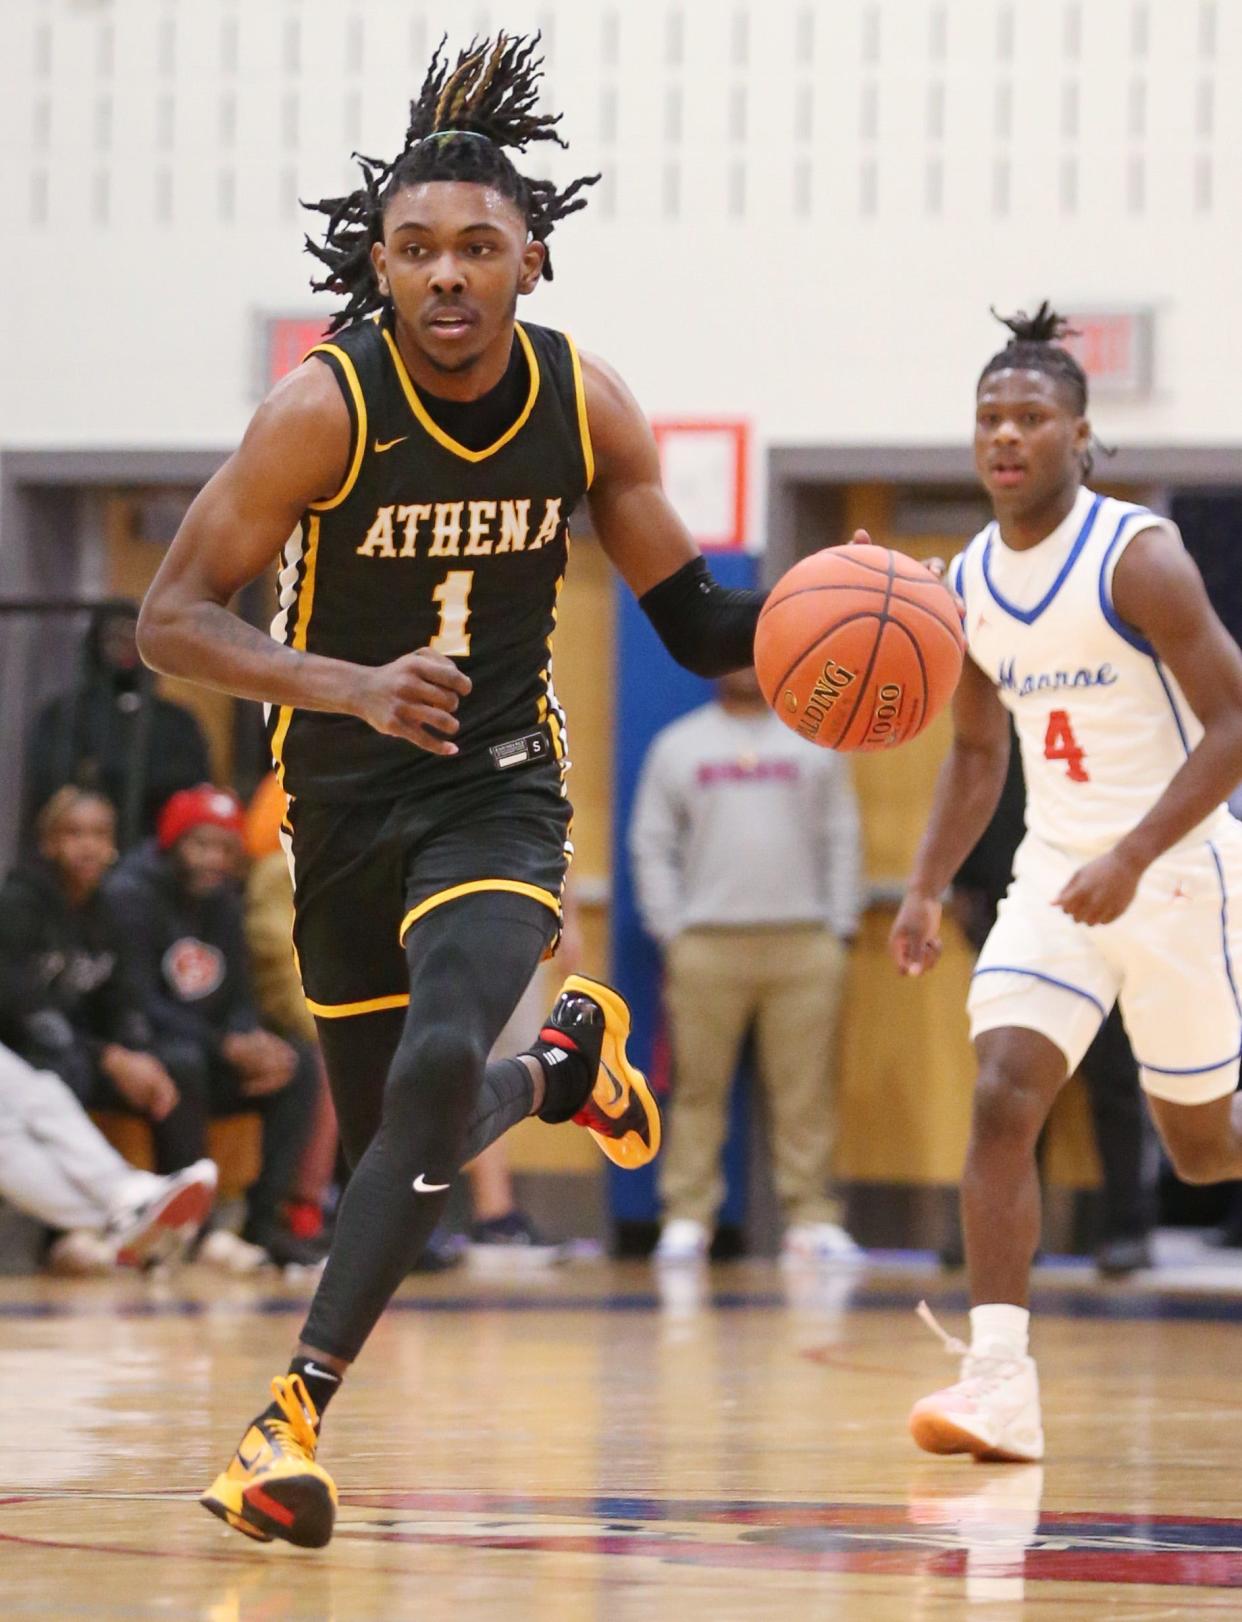 Greece Athena senior guard Khorie Reaves starts the fast break up court ahead of Monroe's Tajmir Mullins during their Section V boys basketball game Monday, Dec. 18, 2023 at James Monroe High School in Rochester.